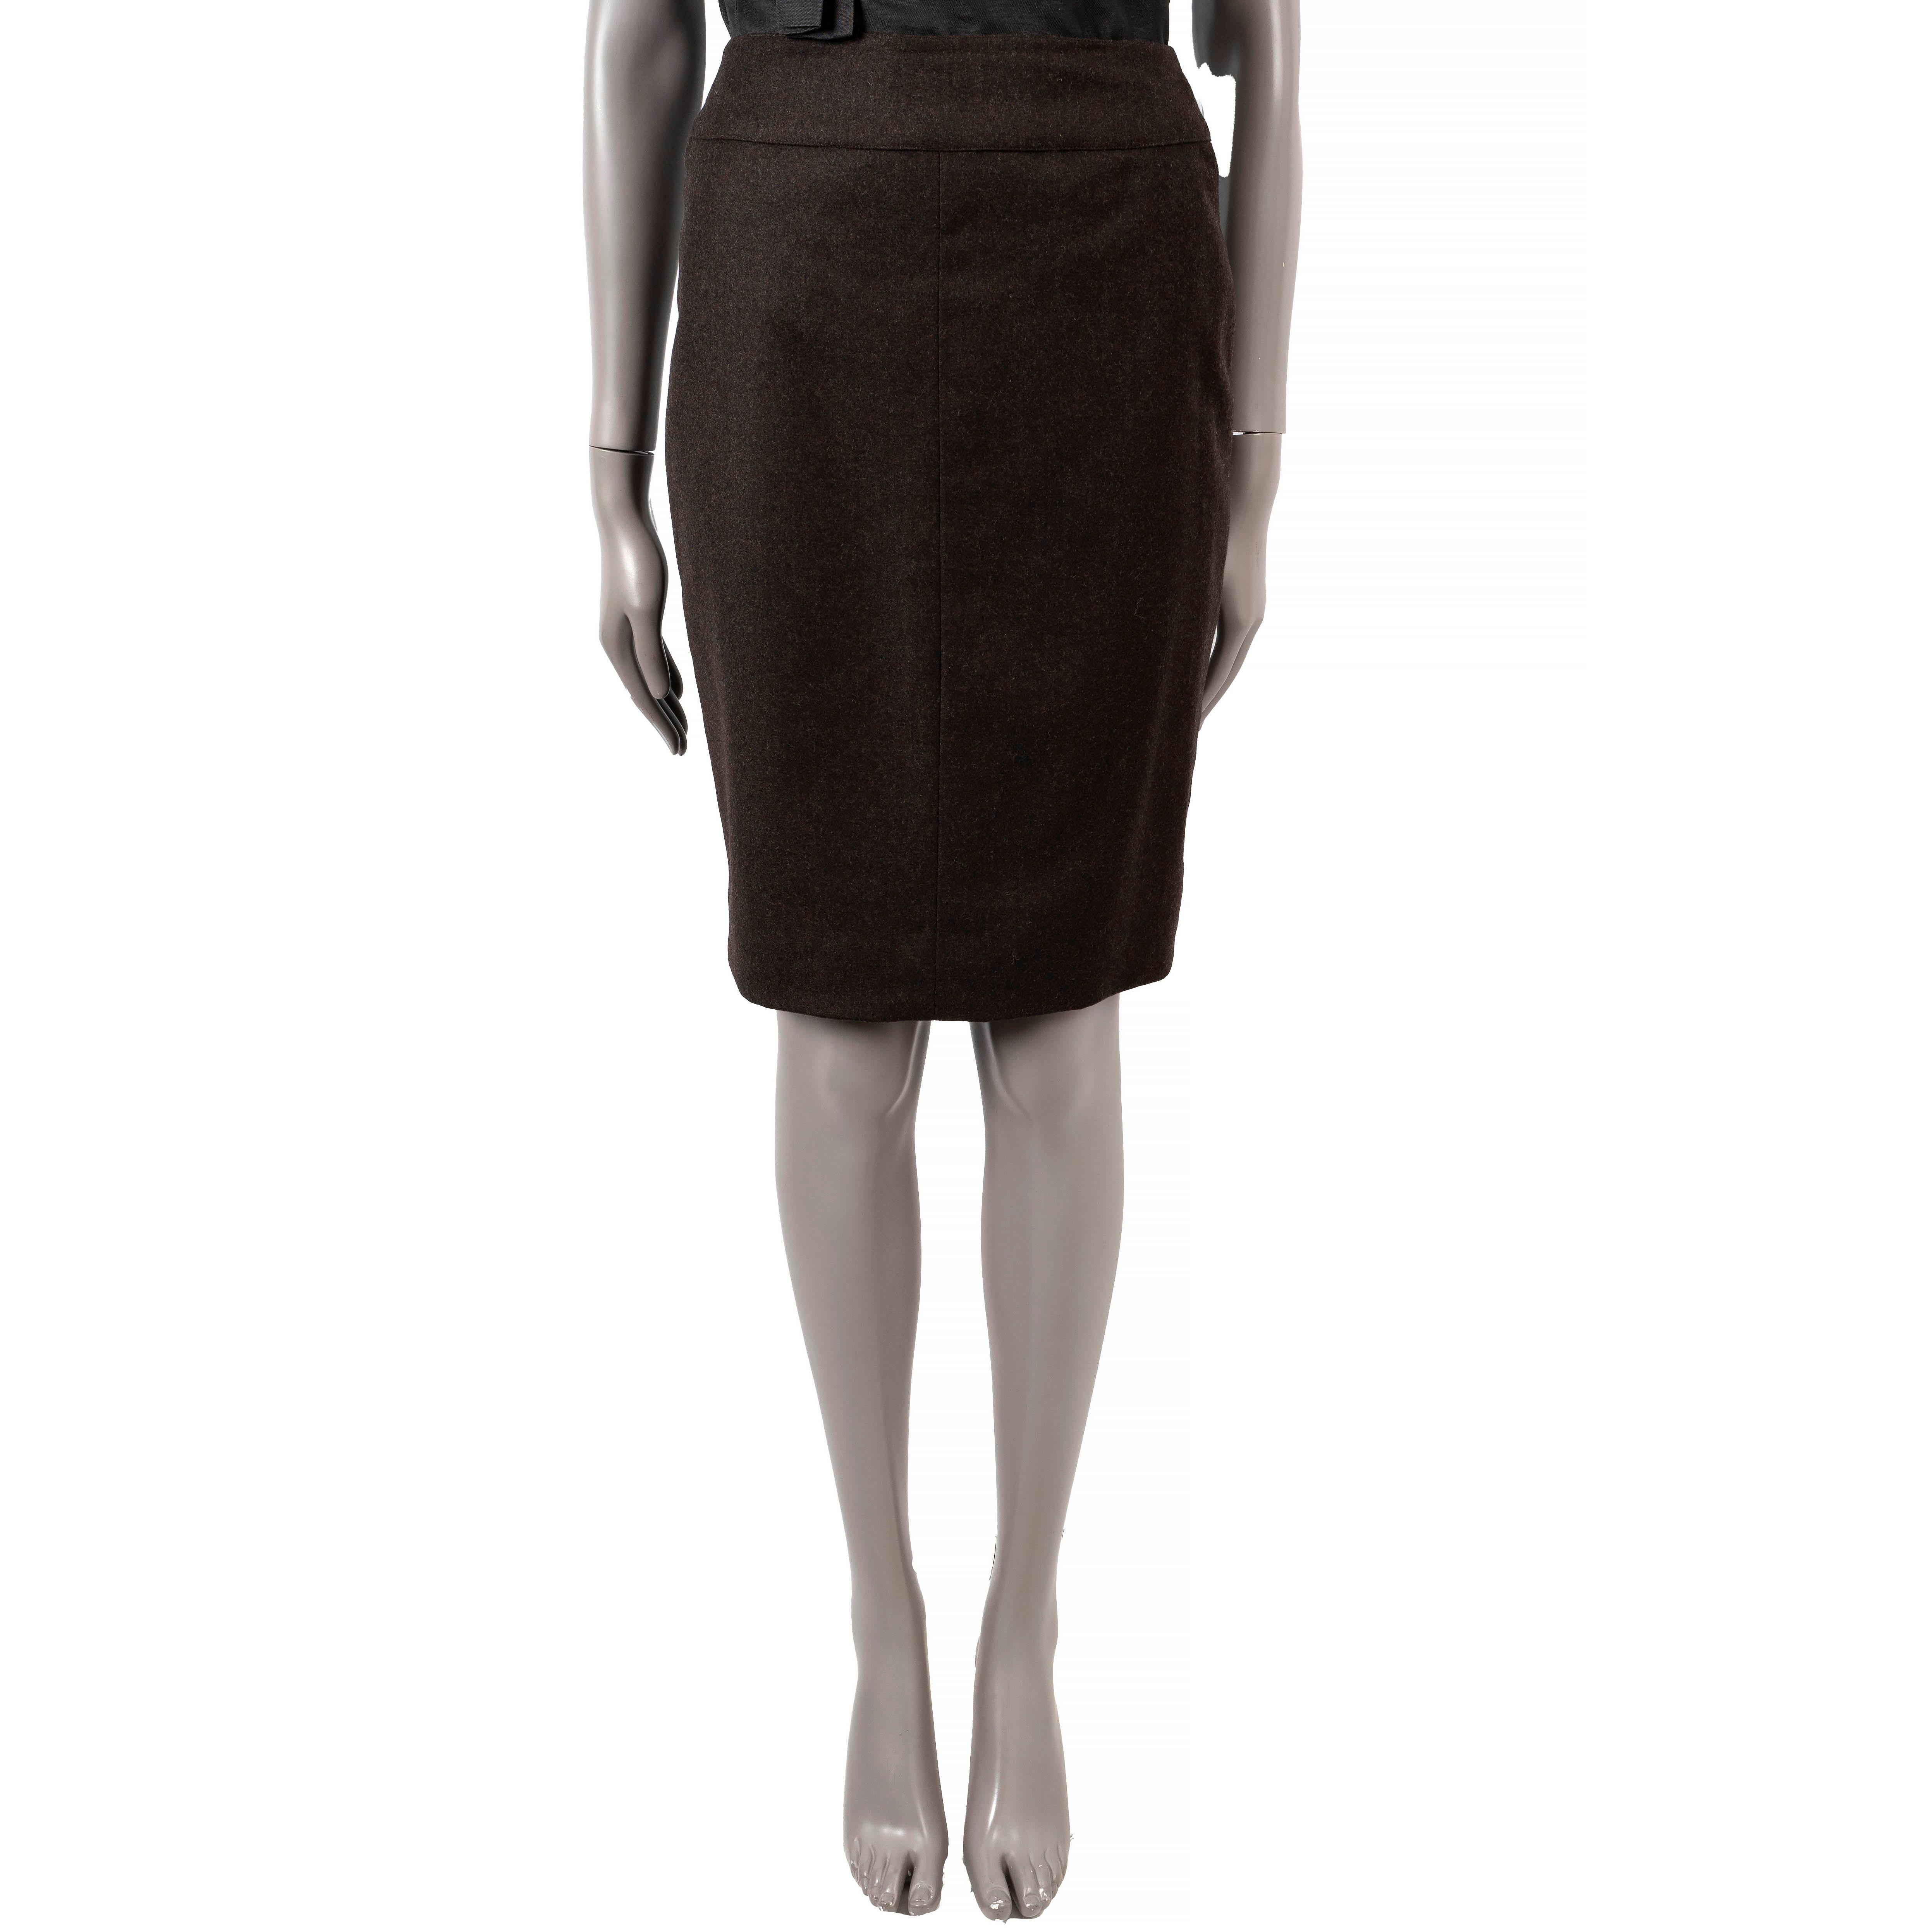 100% authentic Chanel knee length skirt in dark brown (with 10% cashmere) with golden zipper detail on the front. Opens with hidden zipper and two buttons on the front. Lined in silk (100%). Has been worn and is in excellent condition.

1999